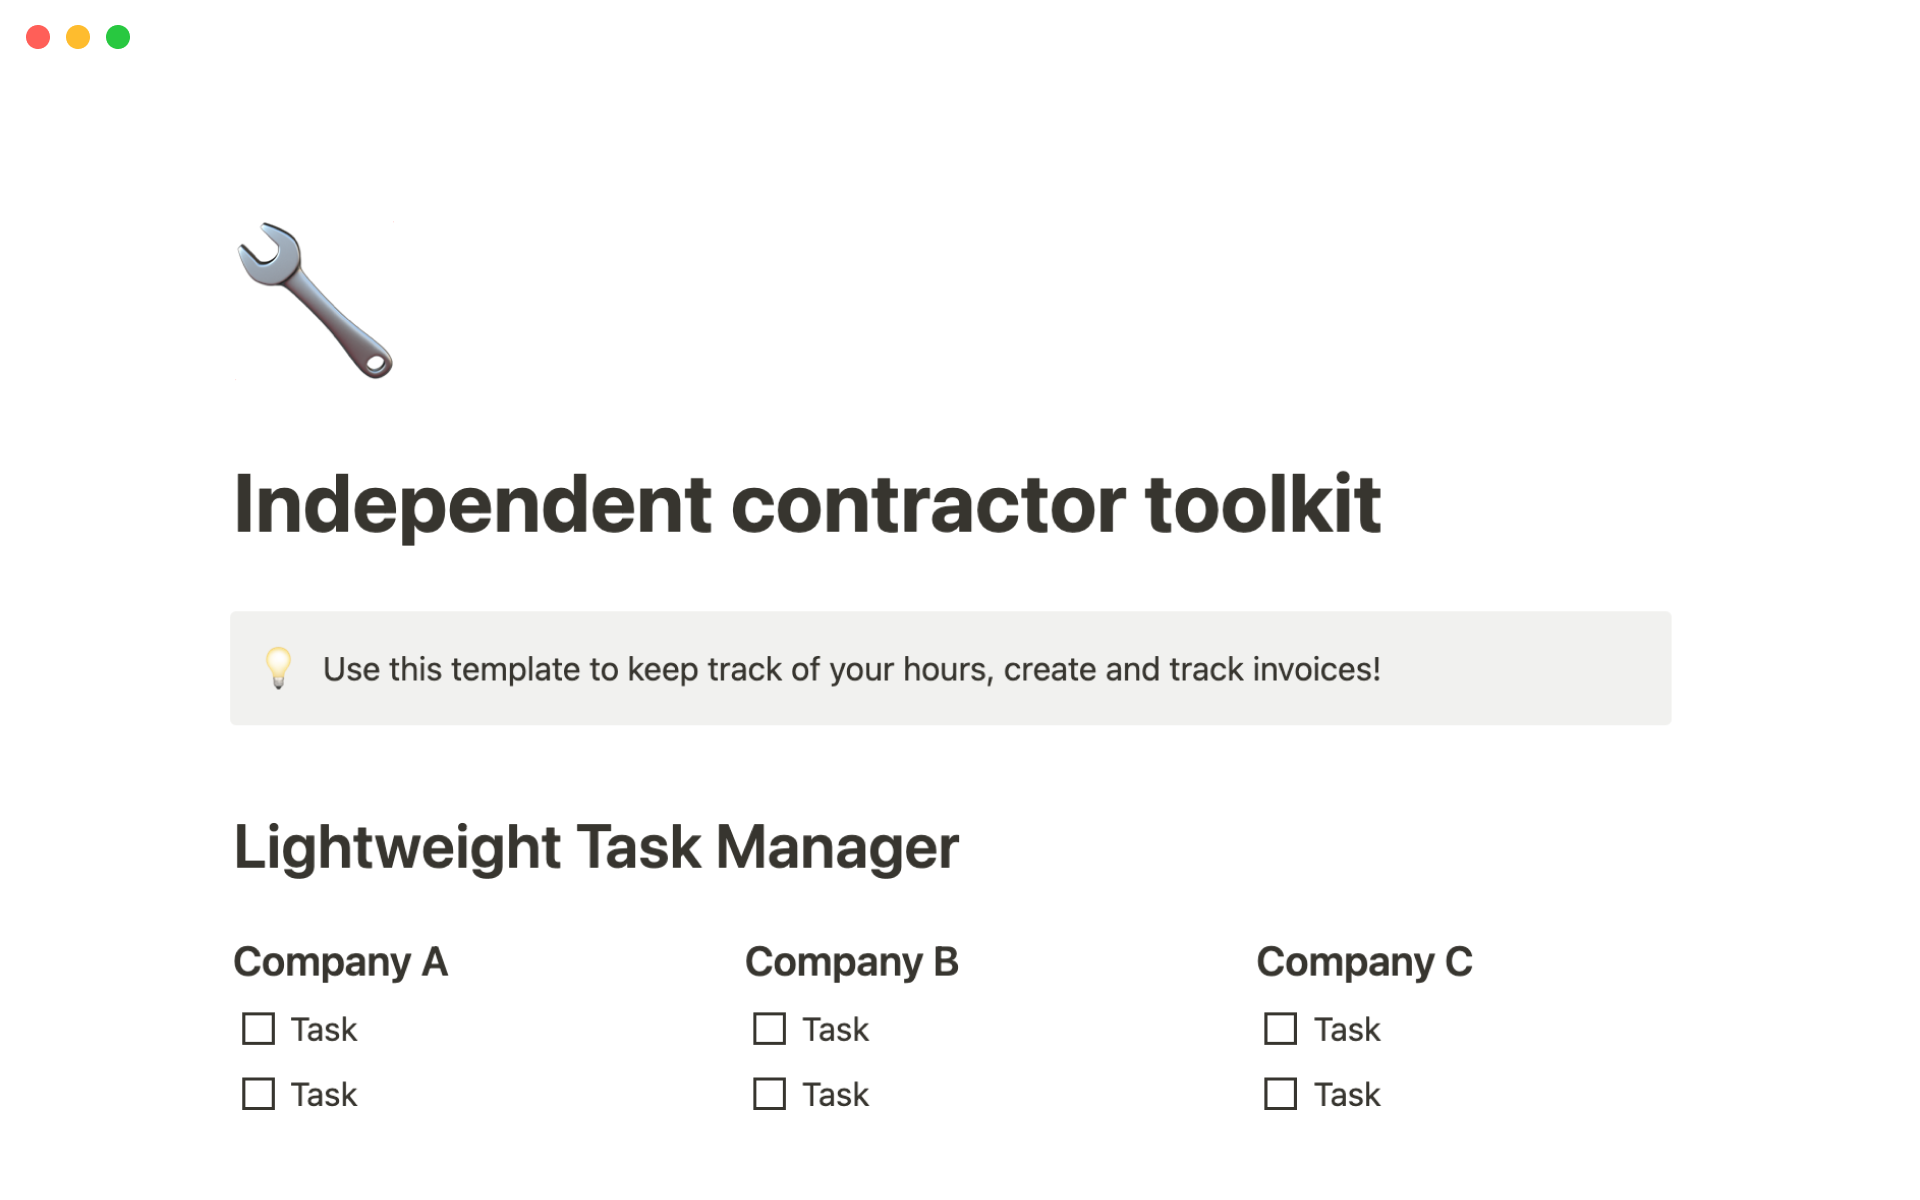 The desktop image for the Independent contractor toolkit template